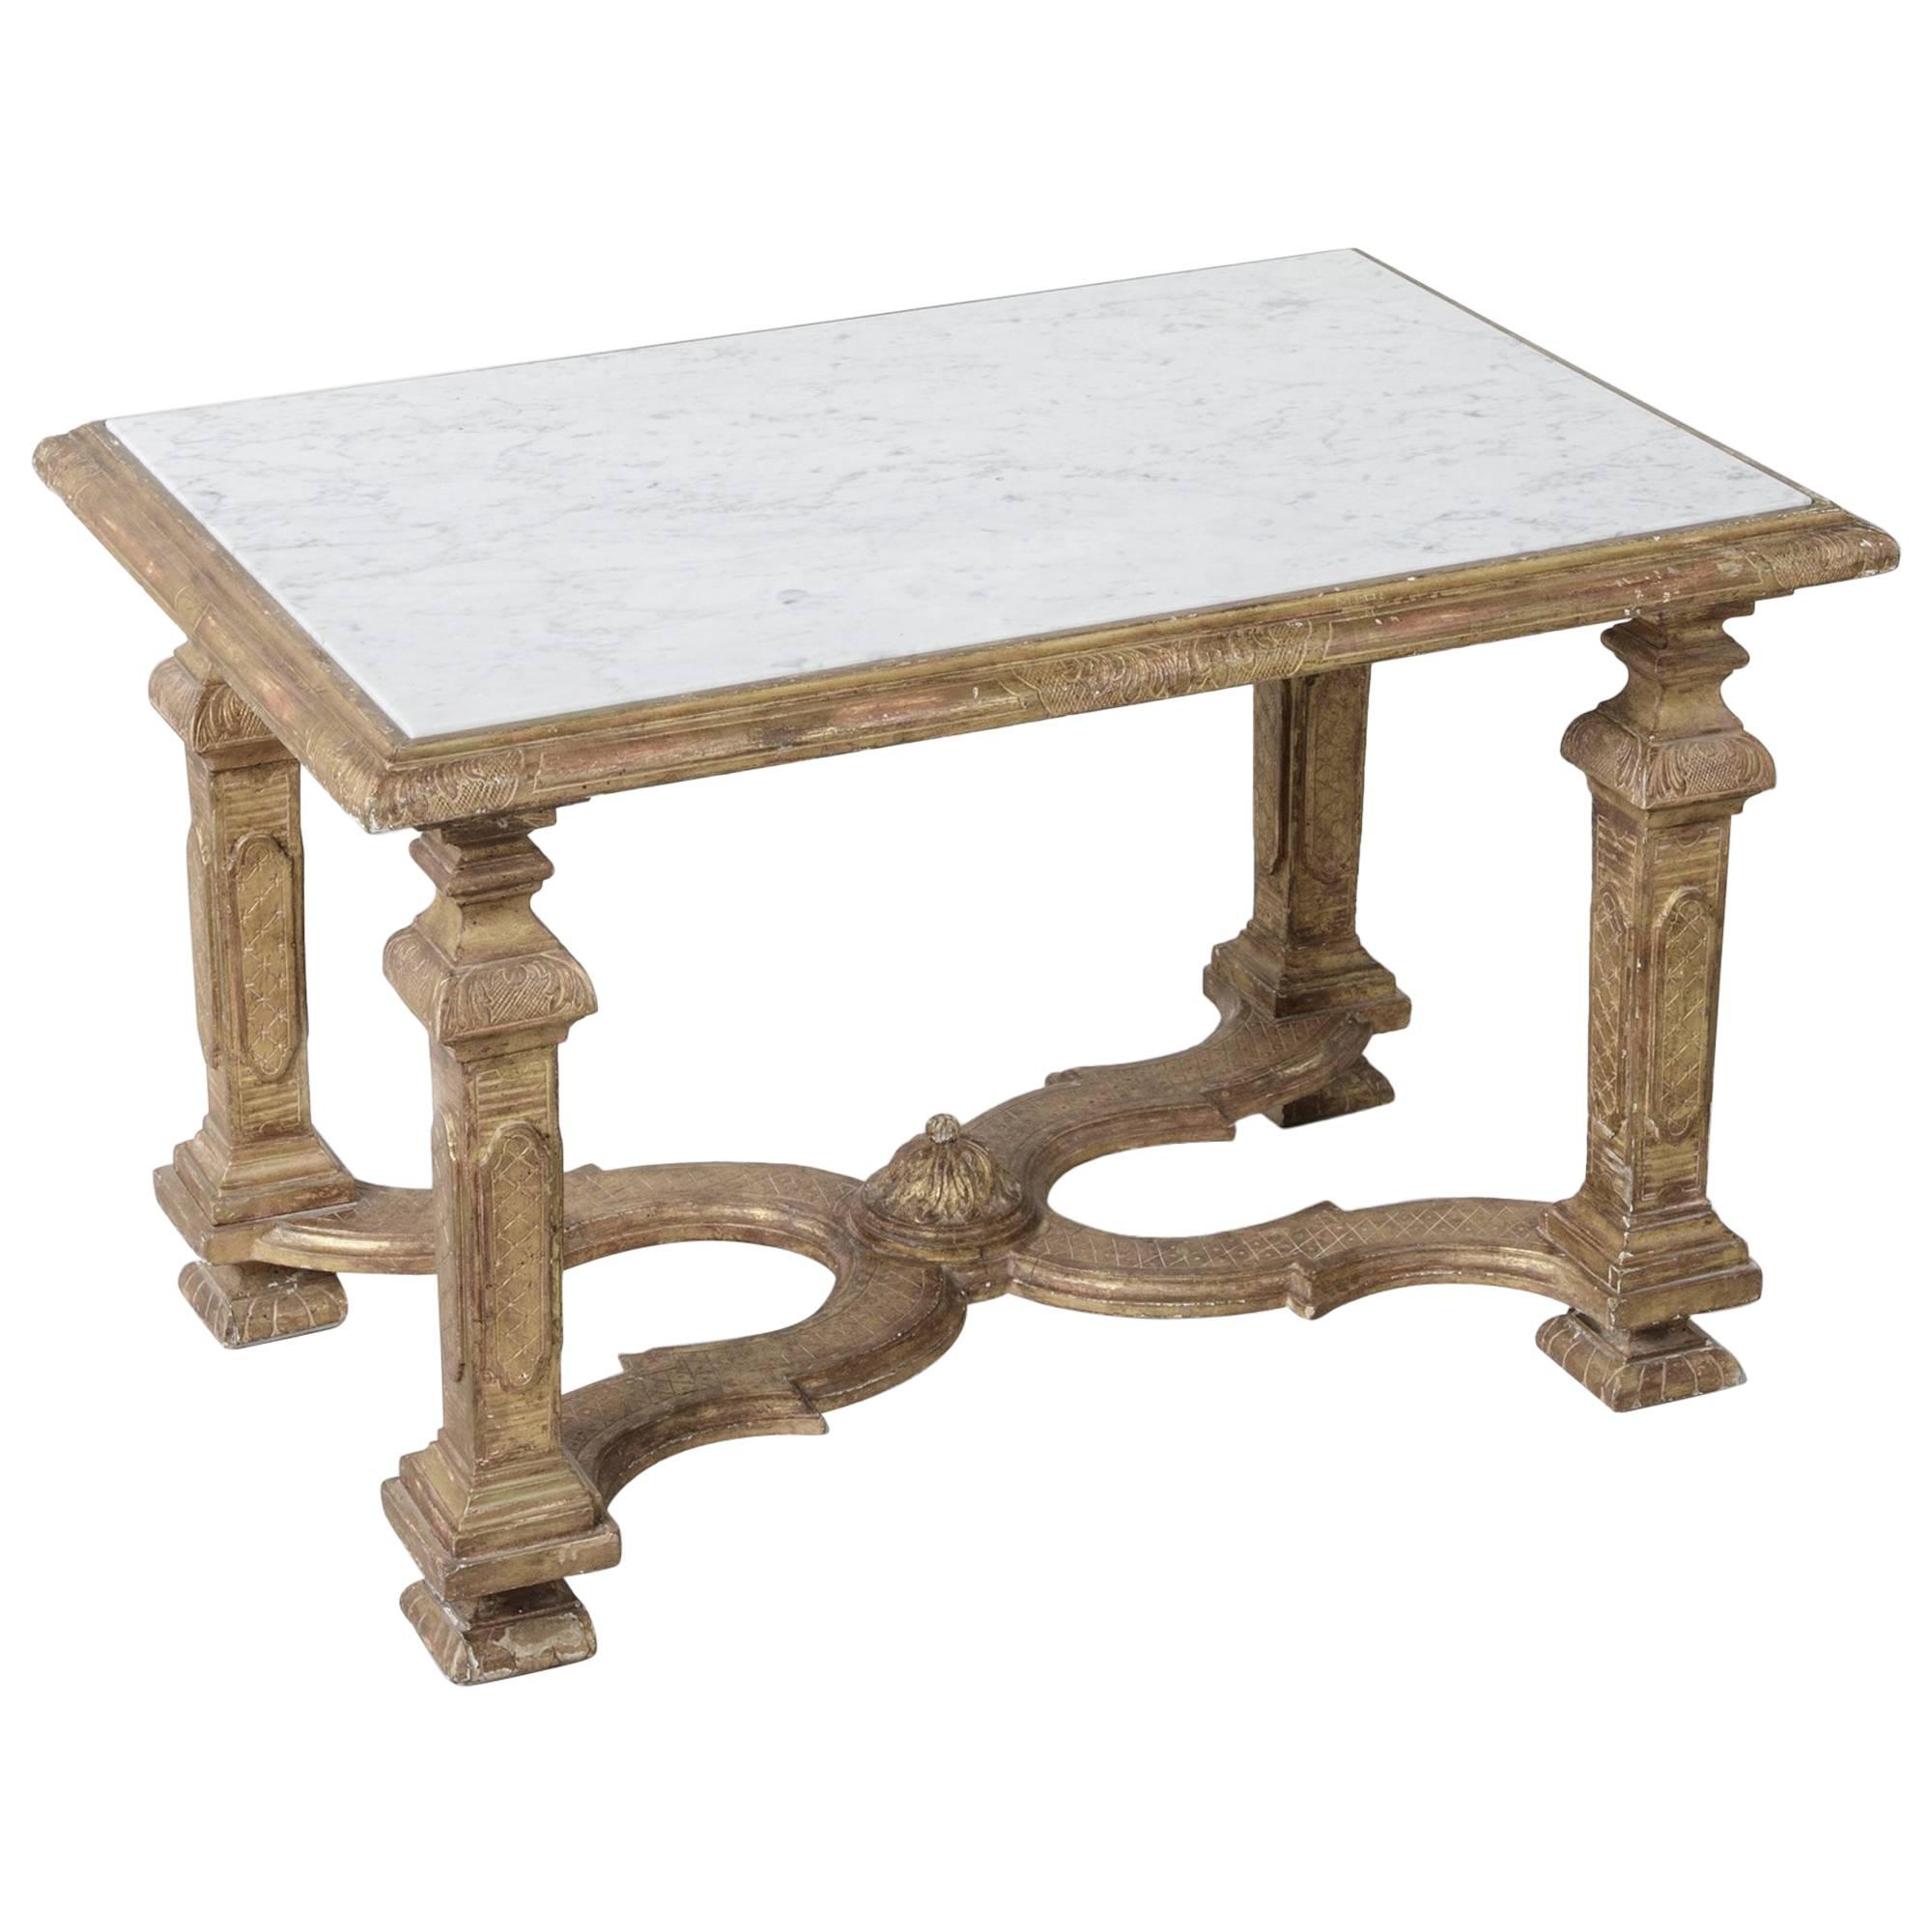 louis xiv tables for master oak corner accent table small round side desk lamps nook uttermost gin cube your focus runner free pattern marble dining and chairs ikea box storage